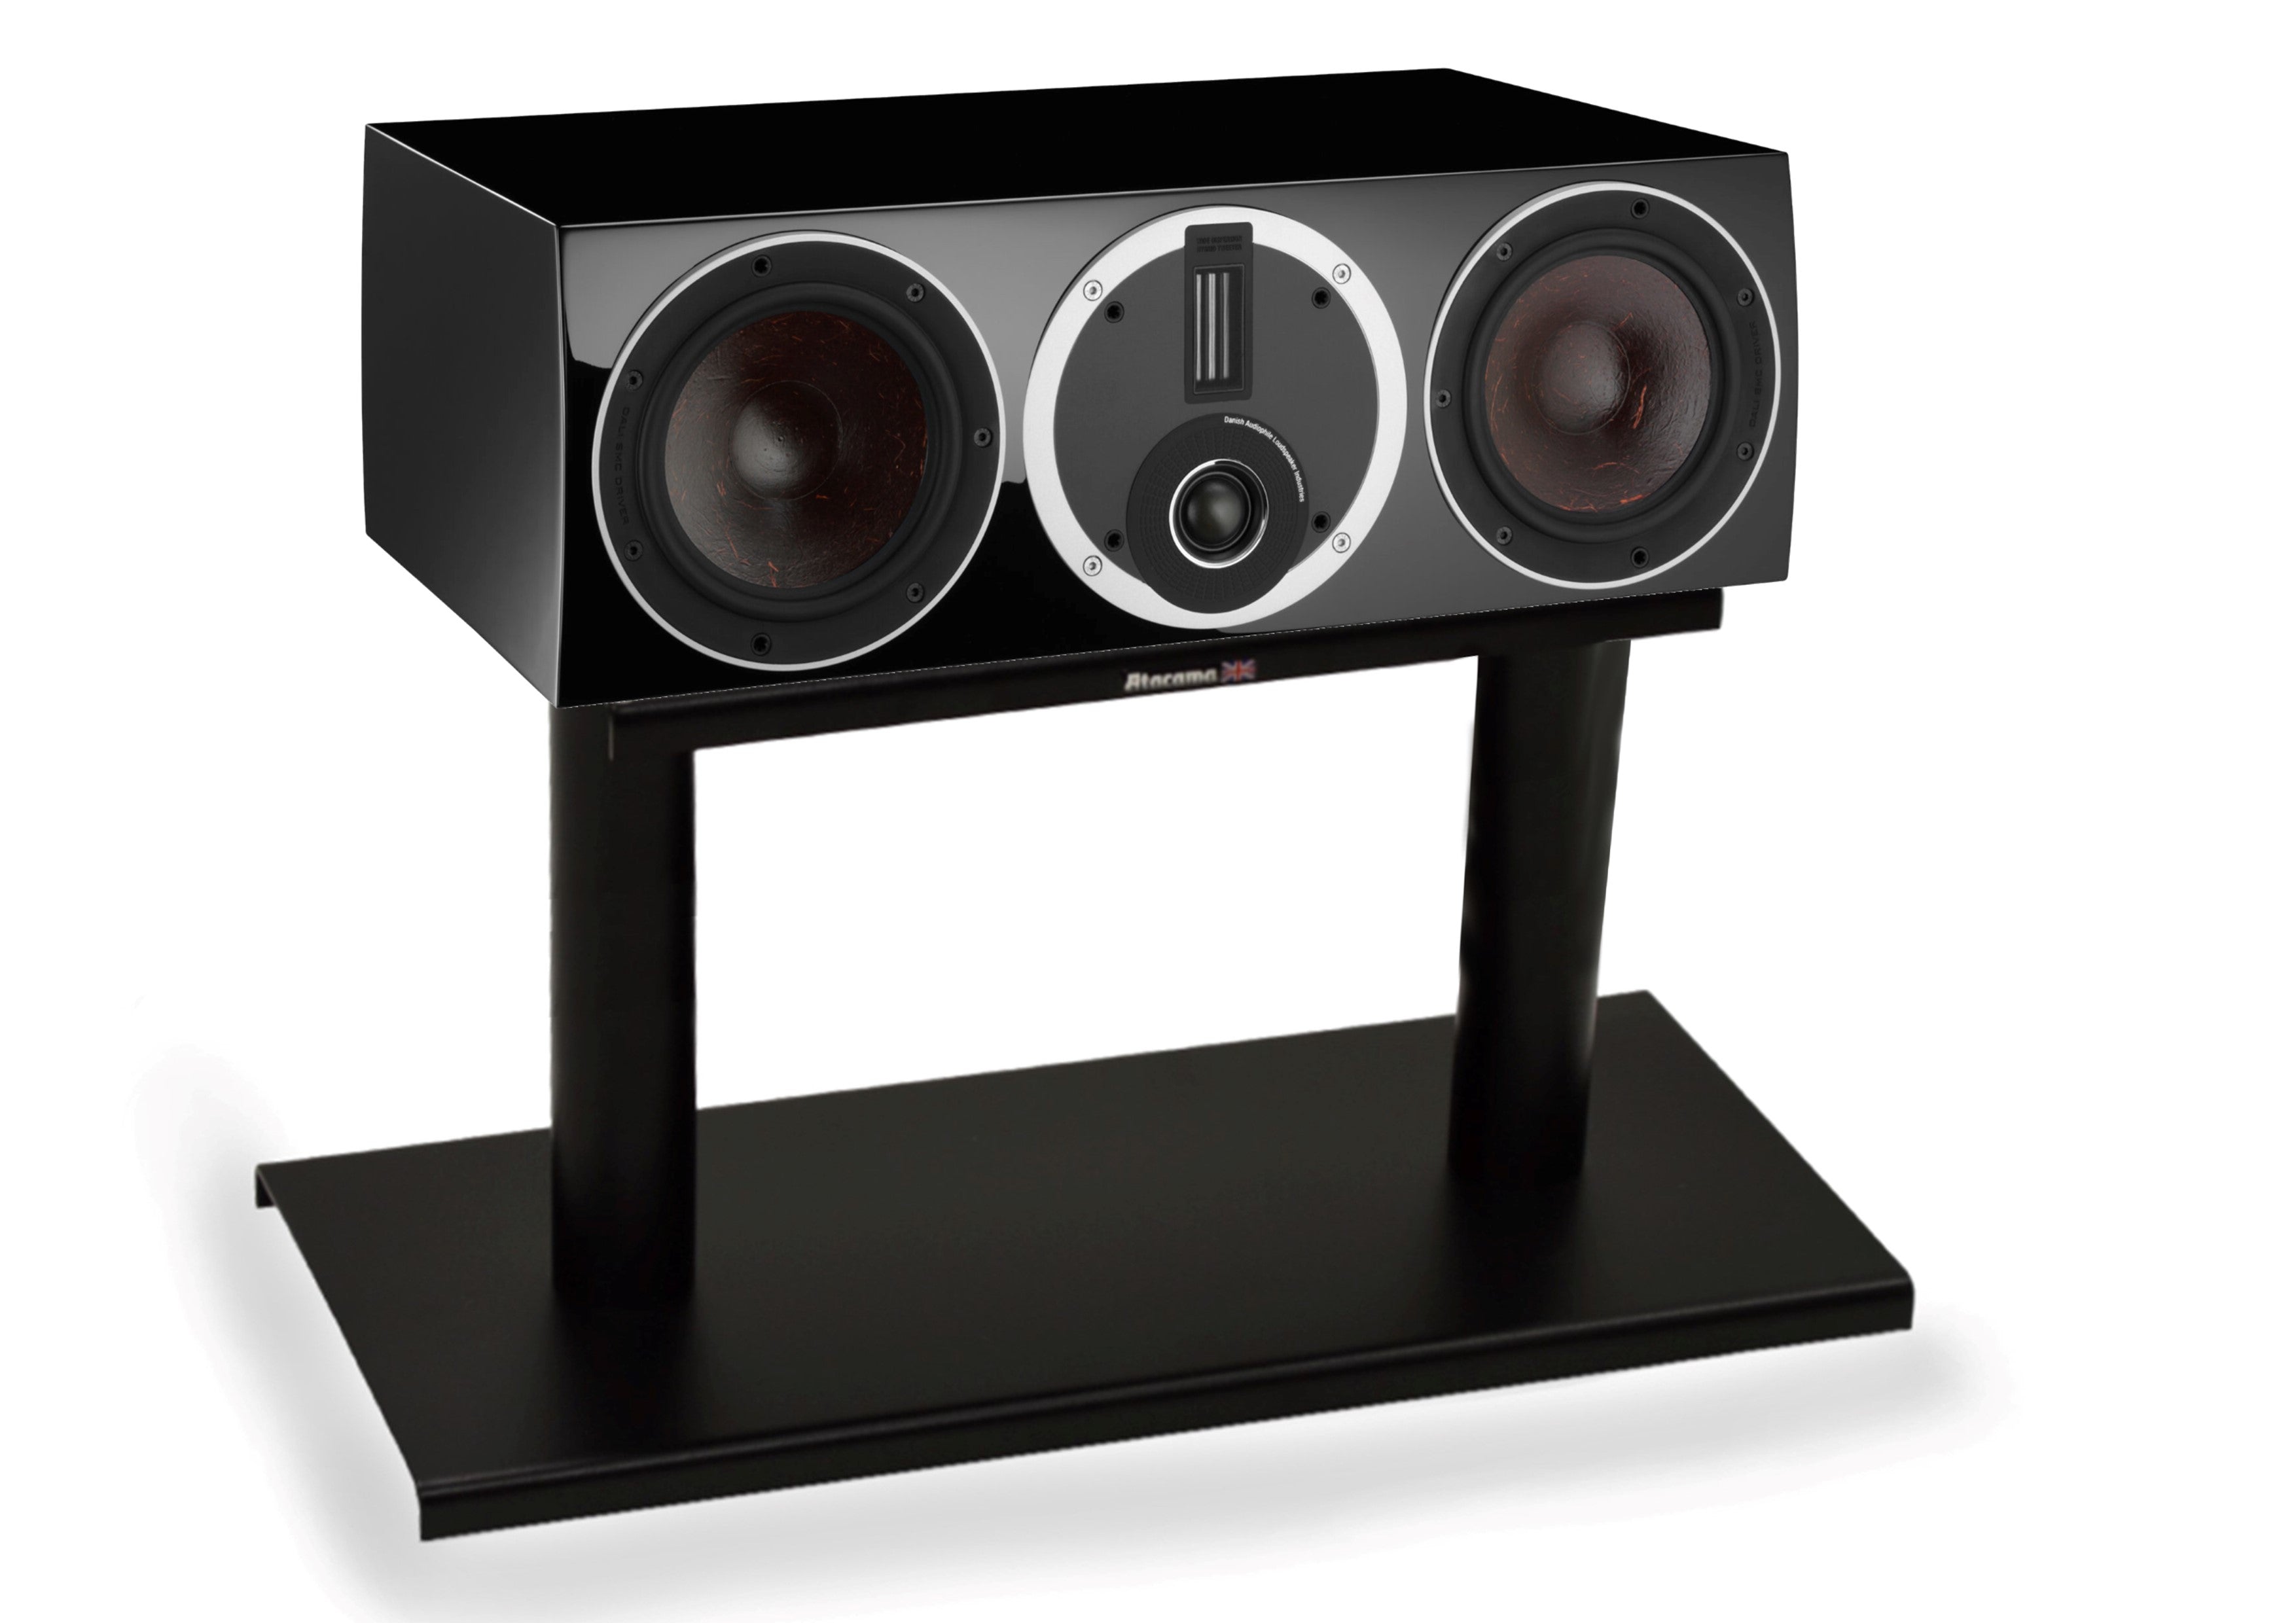 ENSIGN CC01 Centre Channel speaker stand